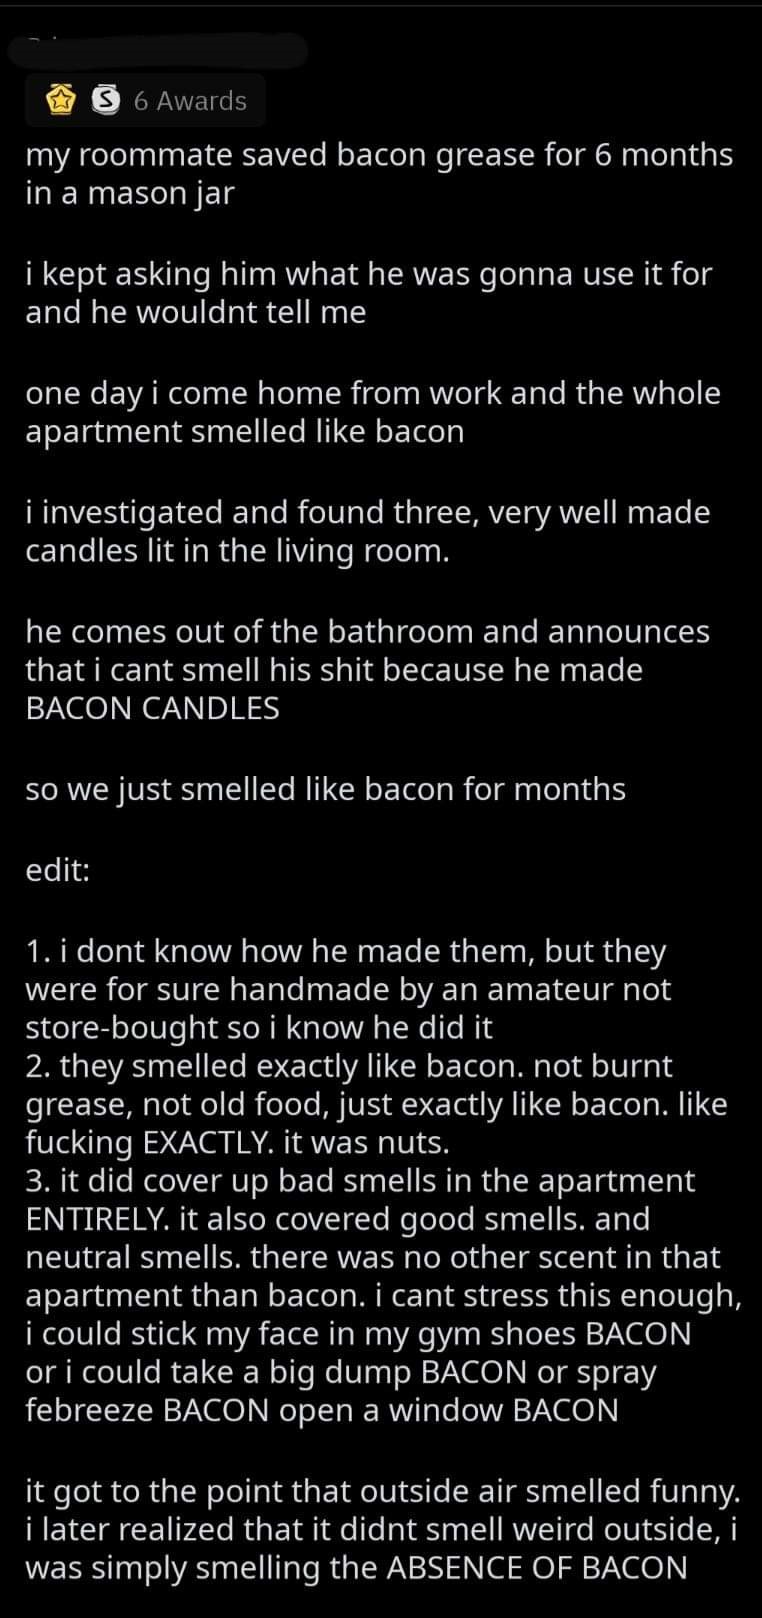 bacon candles madlads - 6 Awards my roommate saved bacon grease for 6 months in a mason jar i kept asking him what he was gonna use it for and he wouldnt tell me one day i come home from work and the whole apartment smelled bacon i investigated and found 